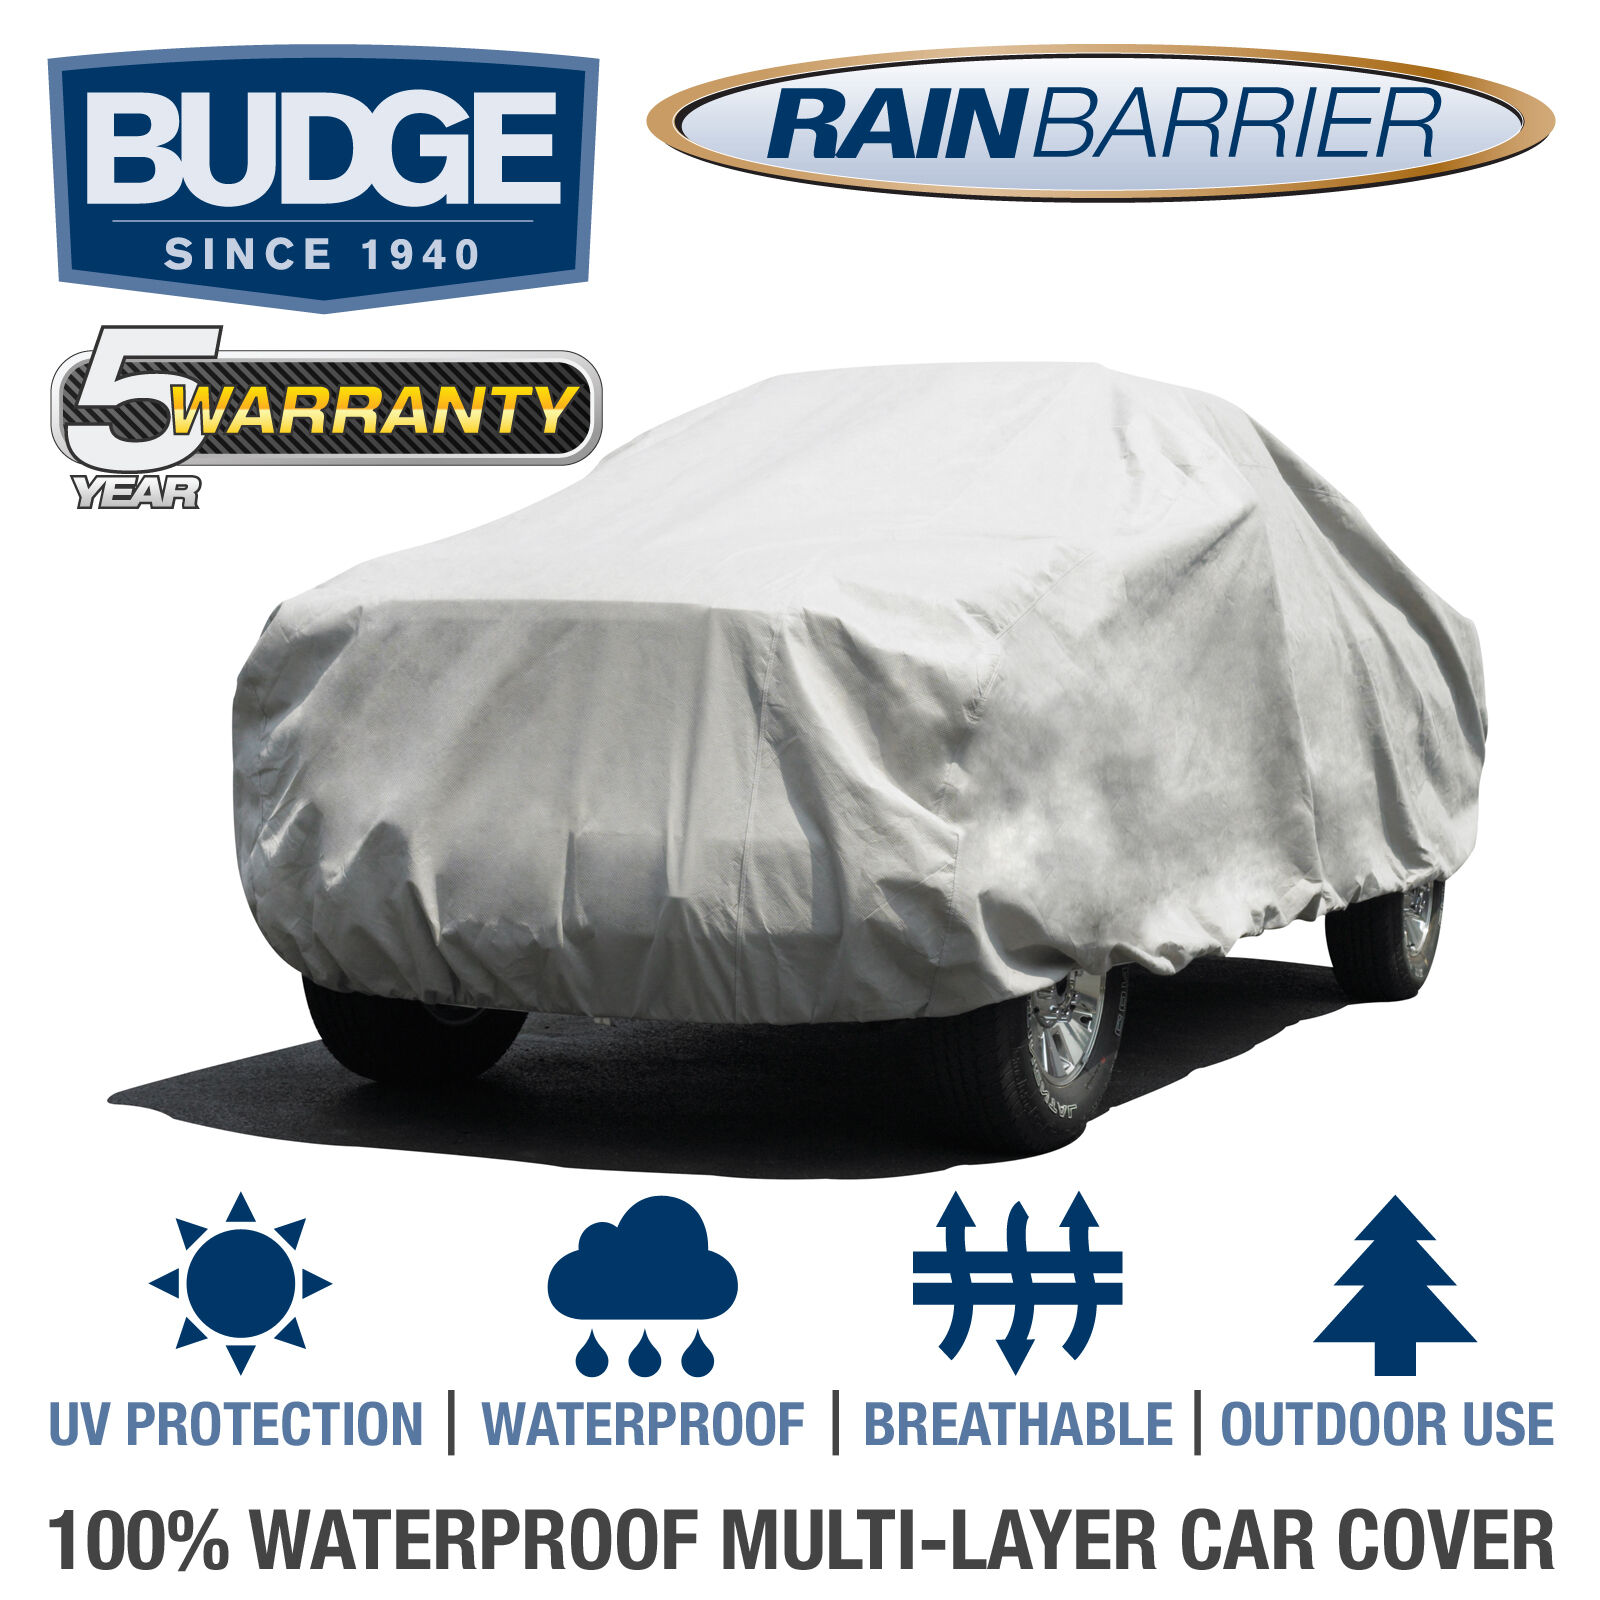 Budge Rain Barrier Truck Cover Fits Long Bed Crew Cab up to 22' Long |Waterproof